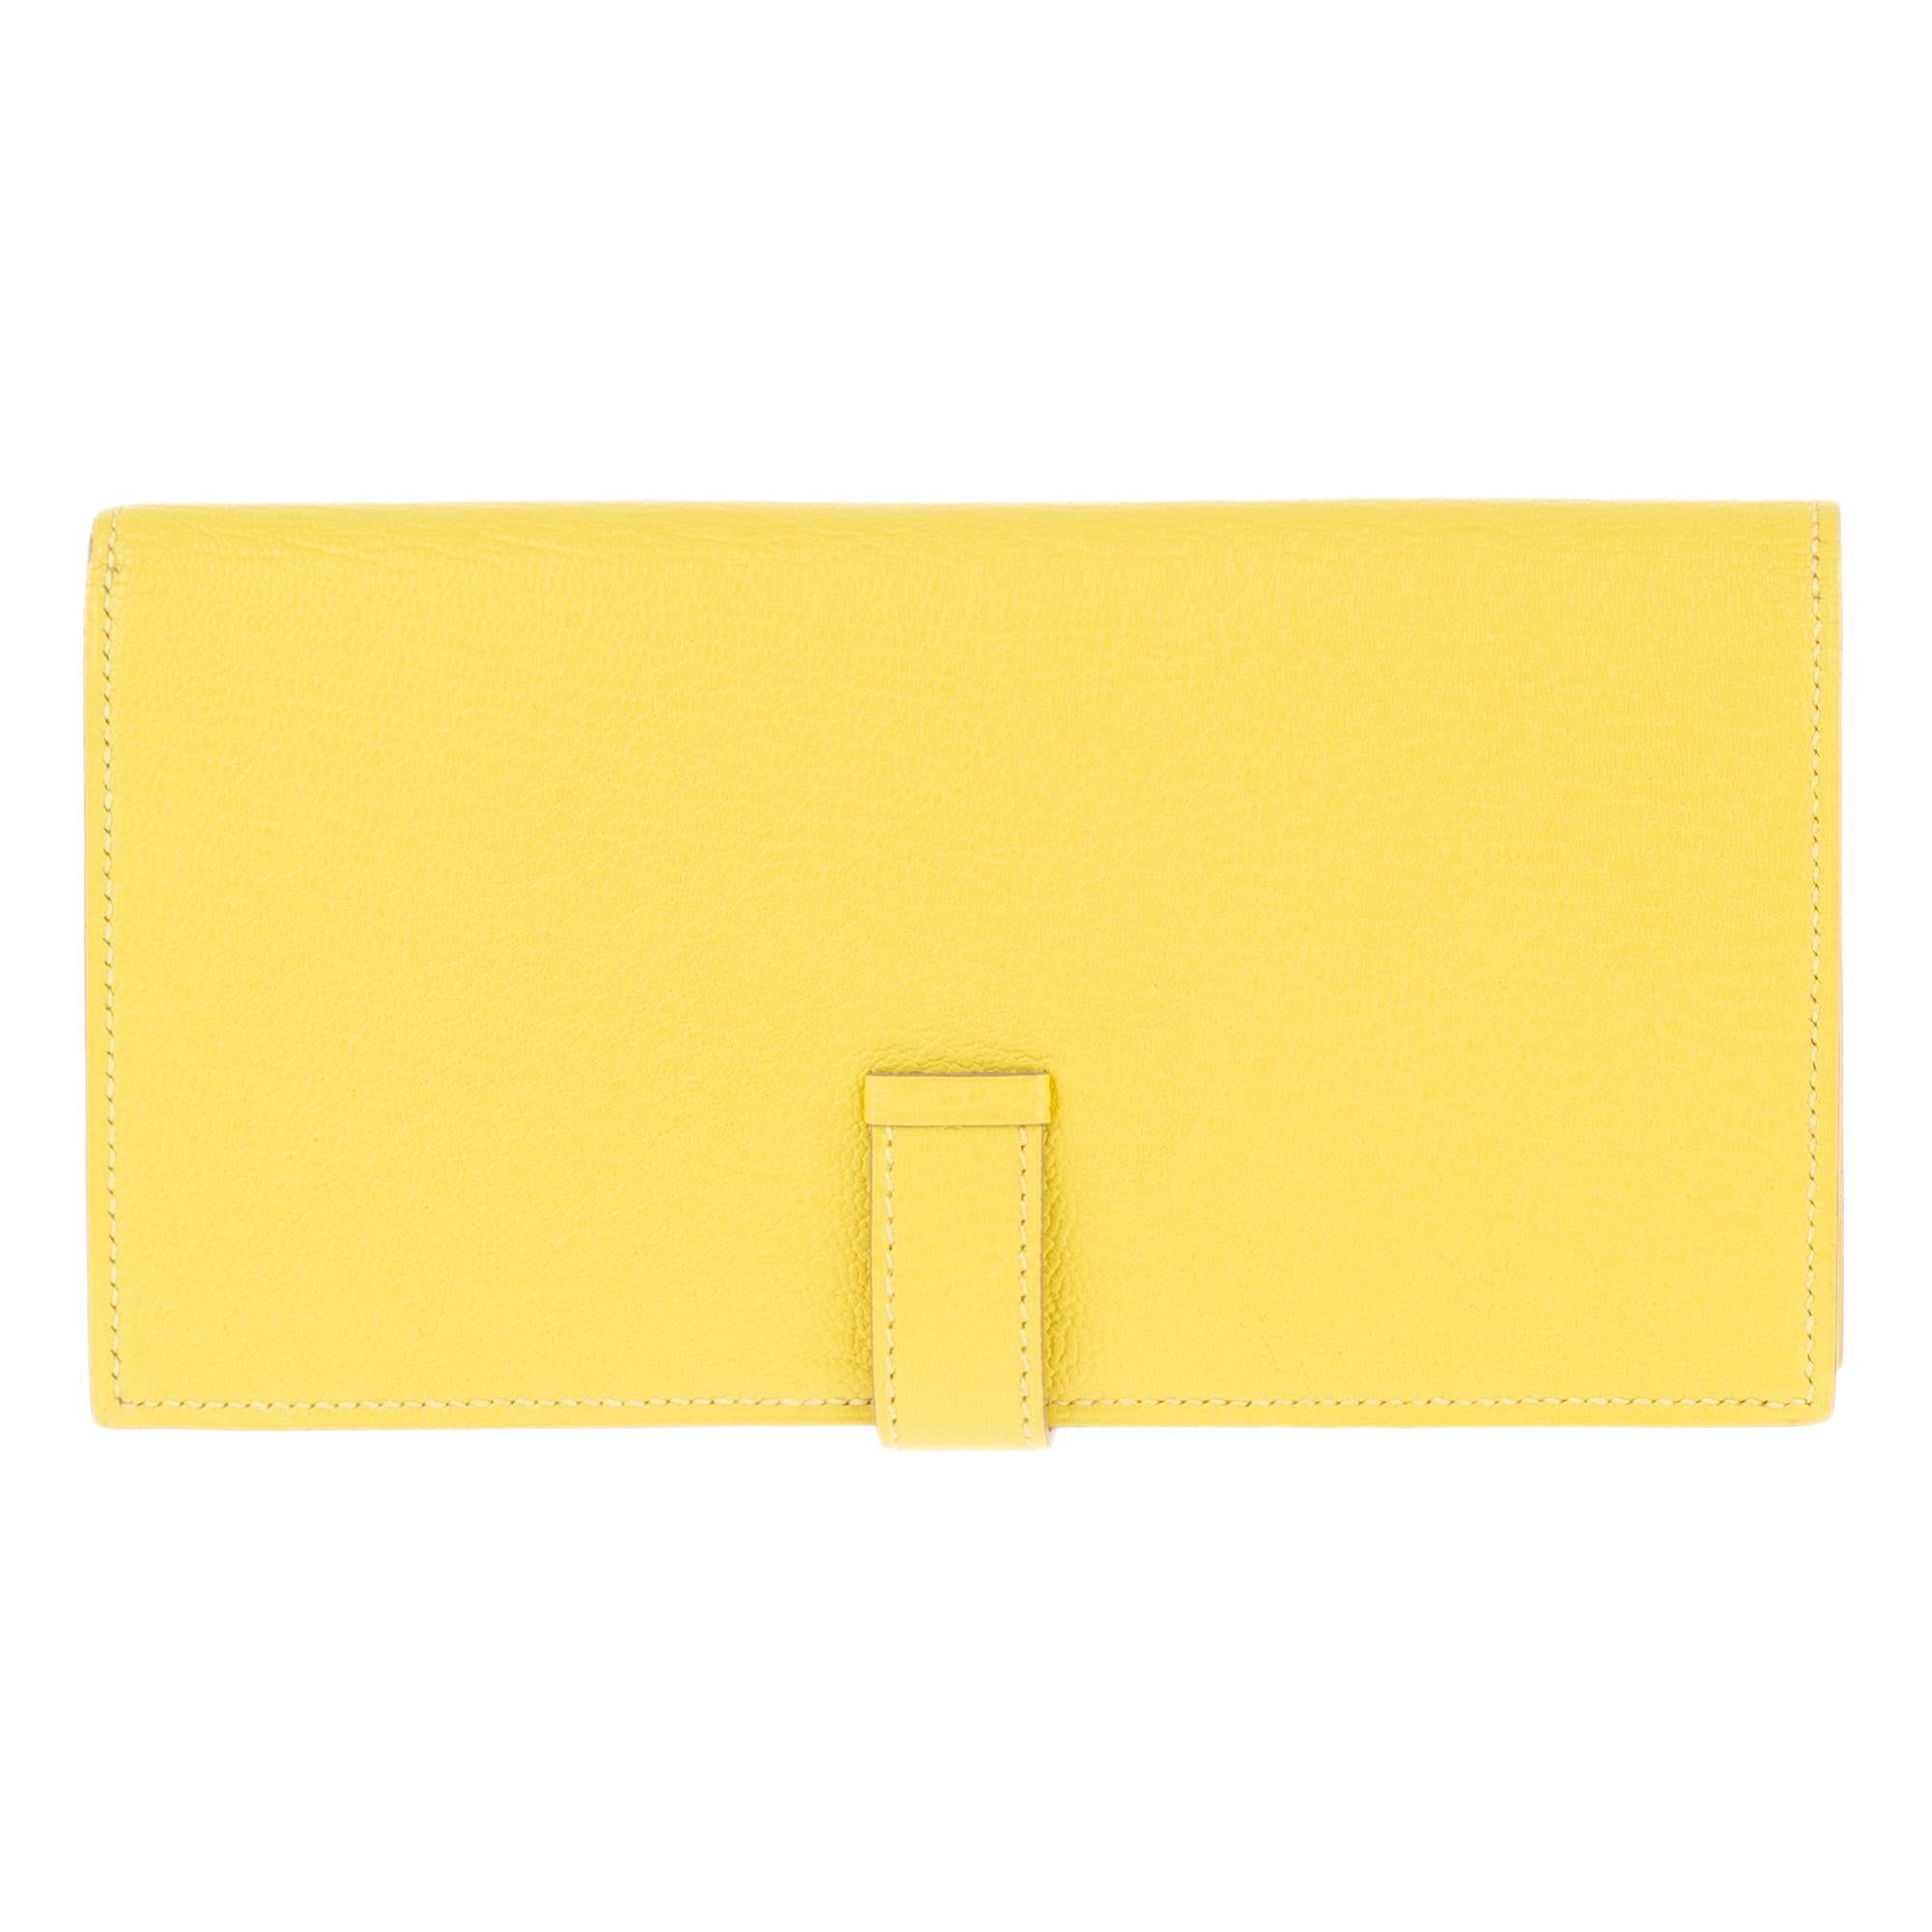 Hermes Béarn wallet in yellow Mysore goat cheese, silver metal trim, carried by hand.

Hook and loop closure H.
Interior lining in yellow Mysore goat, one zipped pocket, four patch pockets, 5 card slots.
Sold with Hermès box.
Signature: 